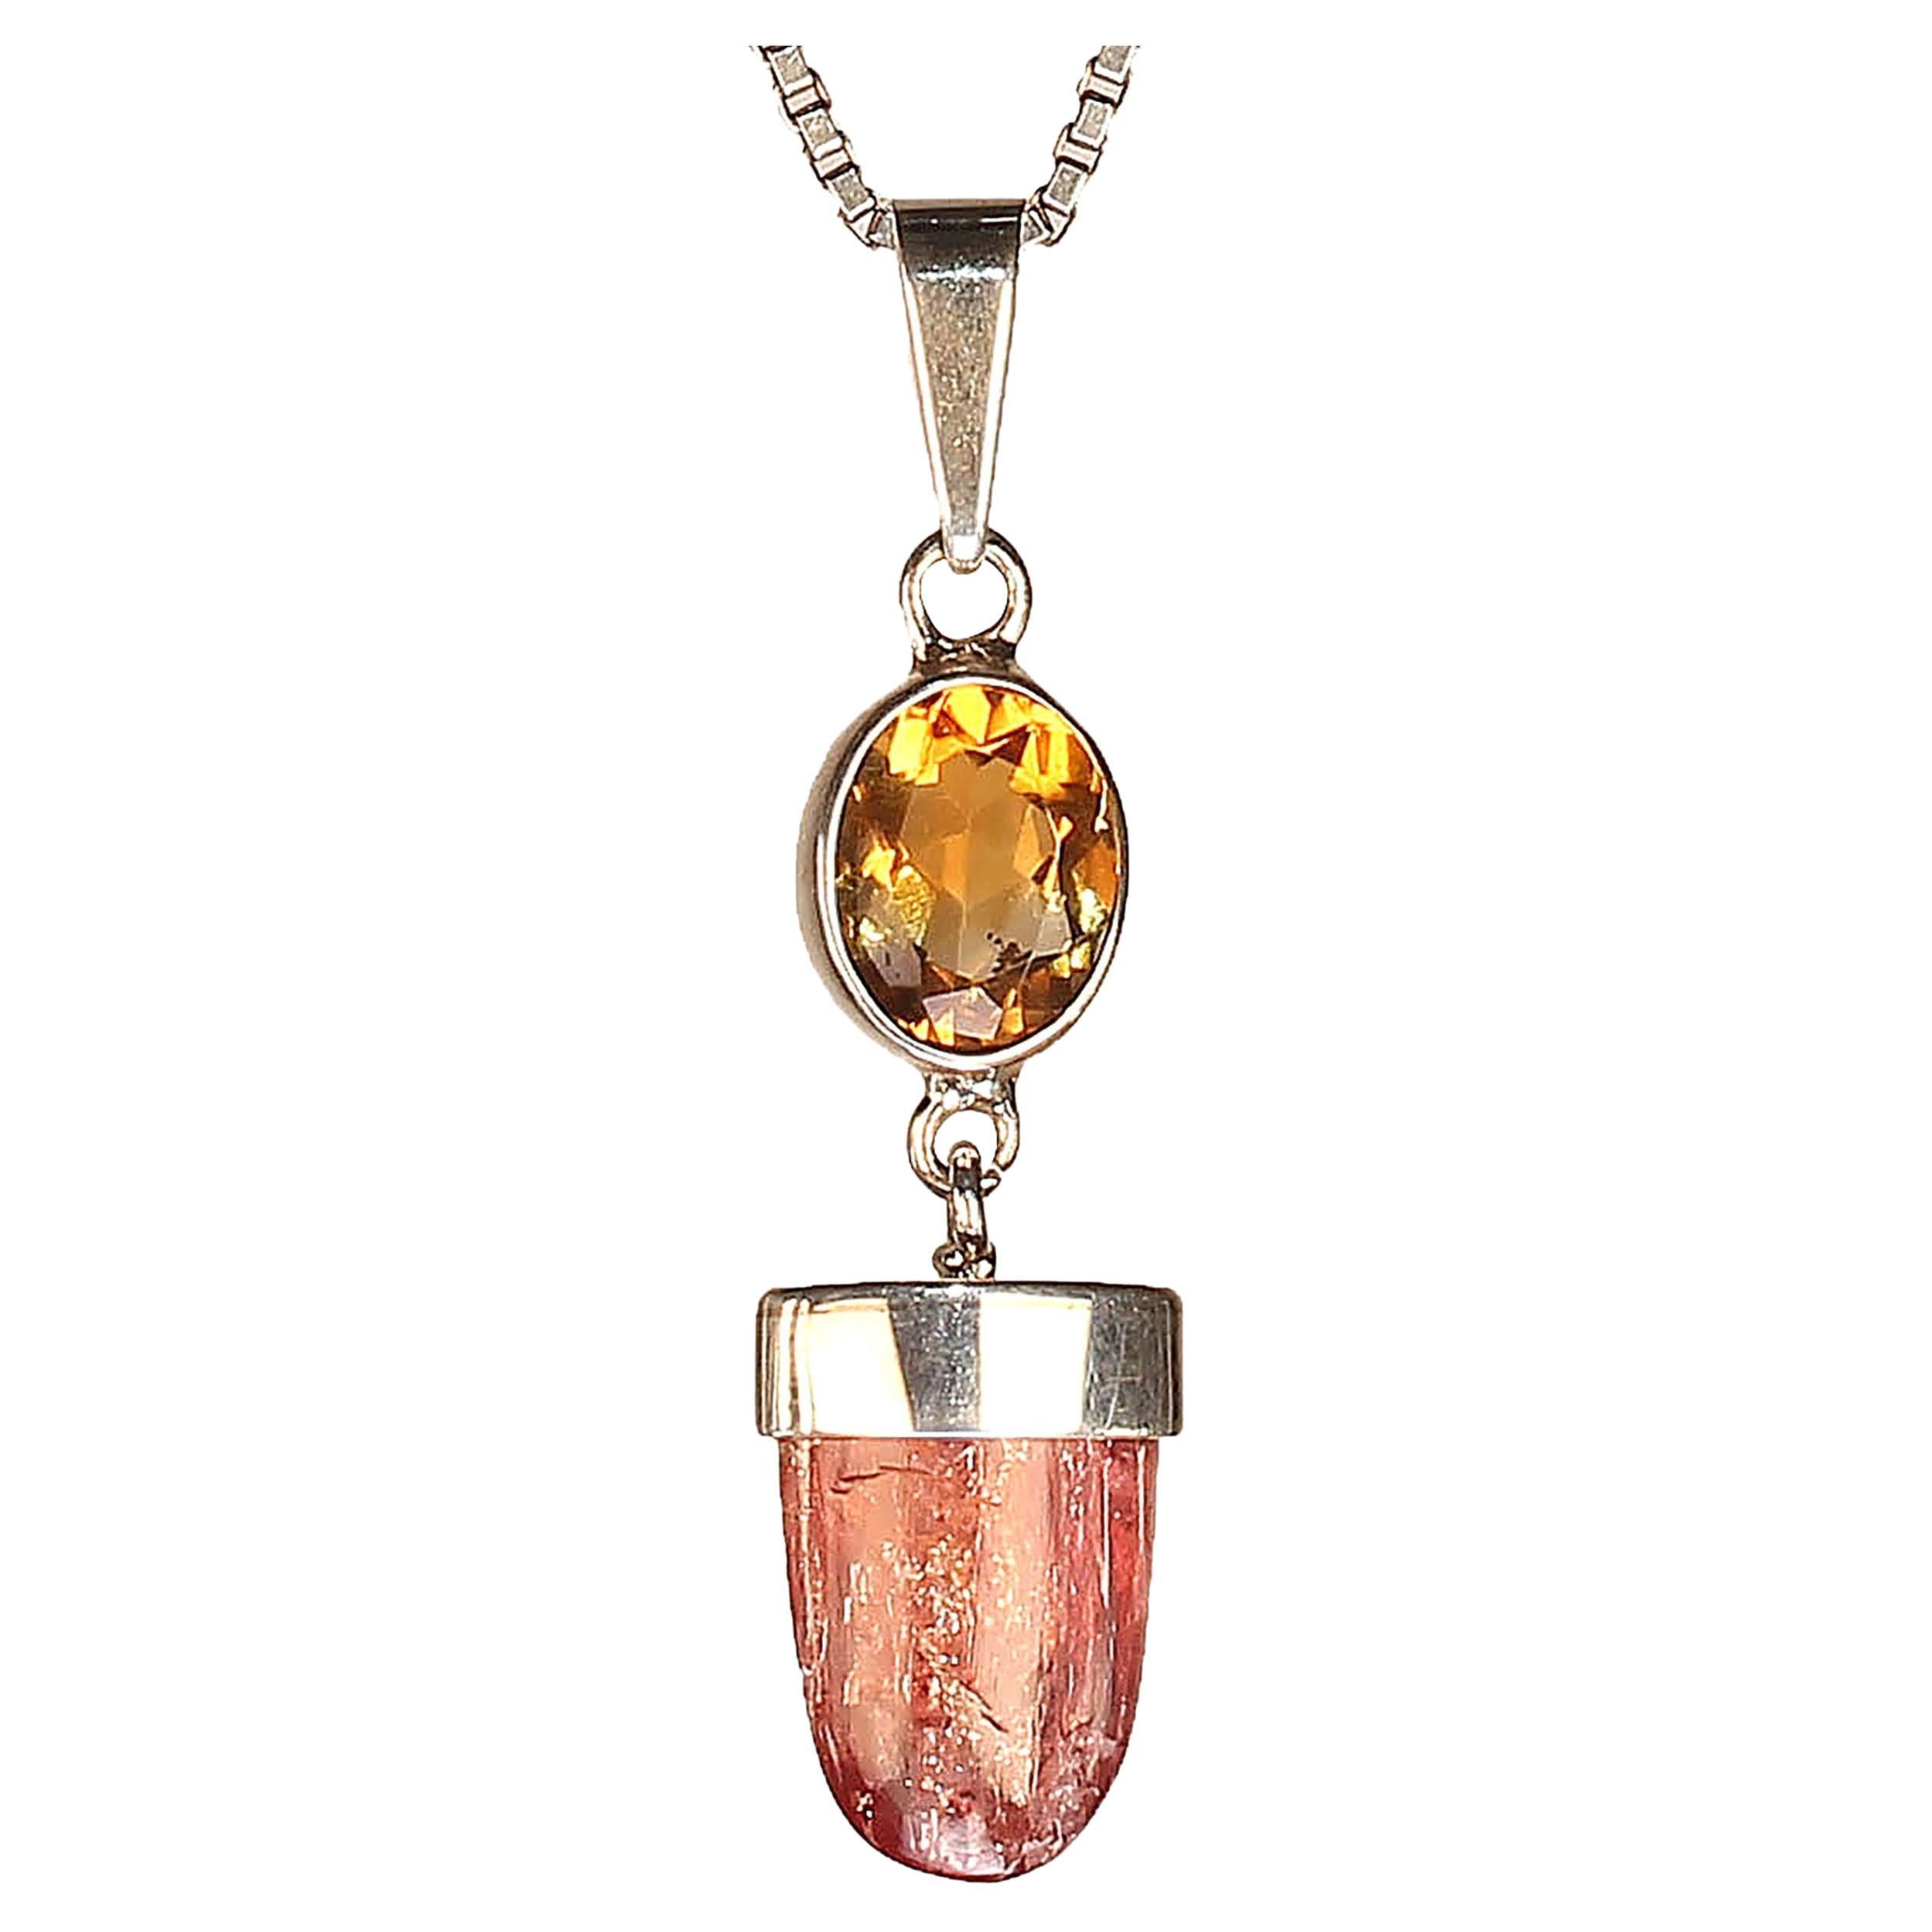 AJD Unique Brazilian Gemstone Pendant of Citrine and Imperial Topaz  Great Gift!